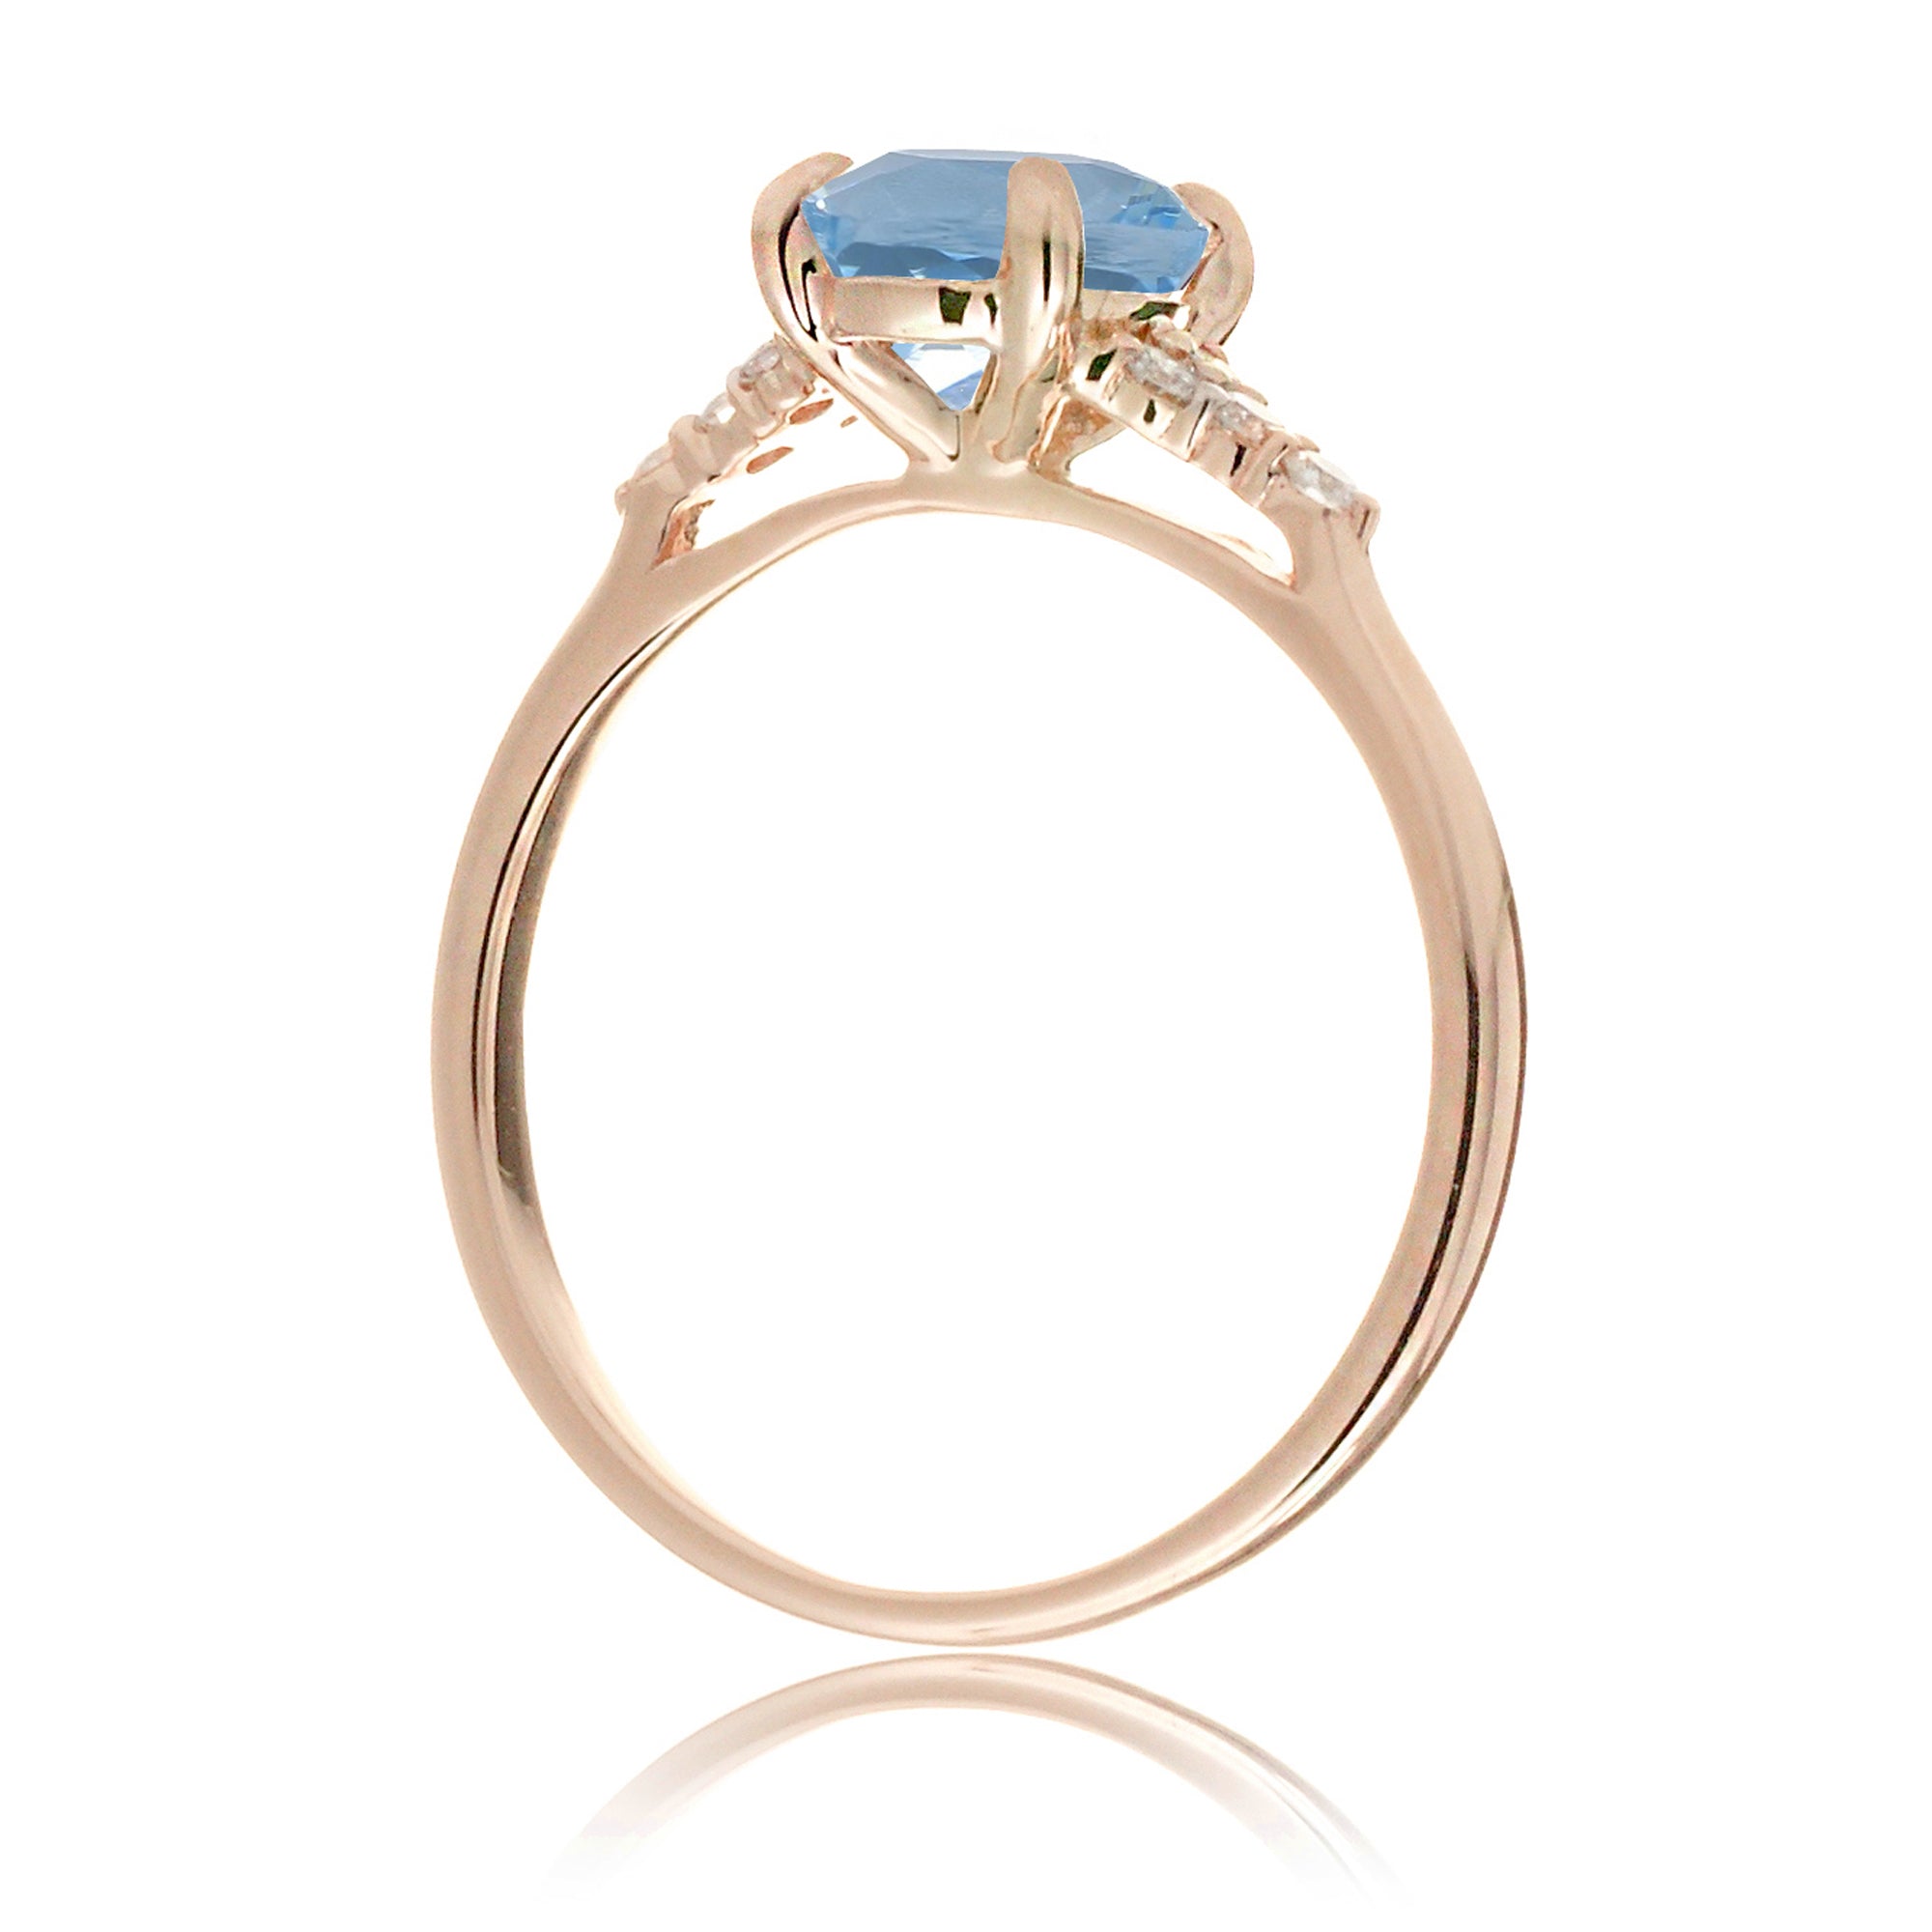 Aquamarine engagement ring cushion cut and solid band in rose gold